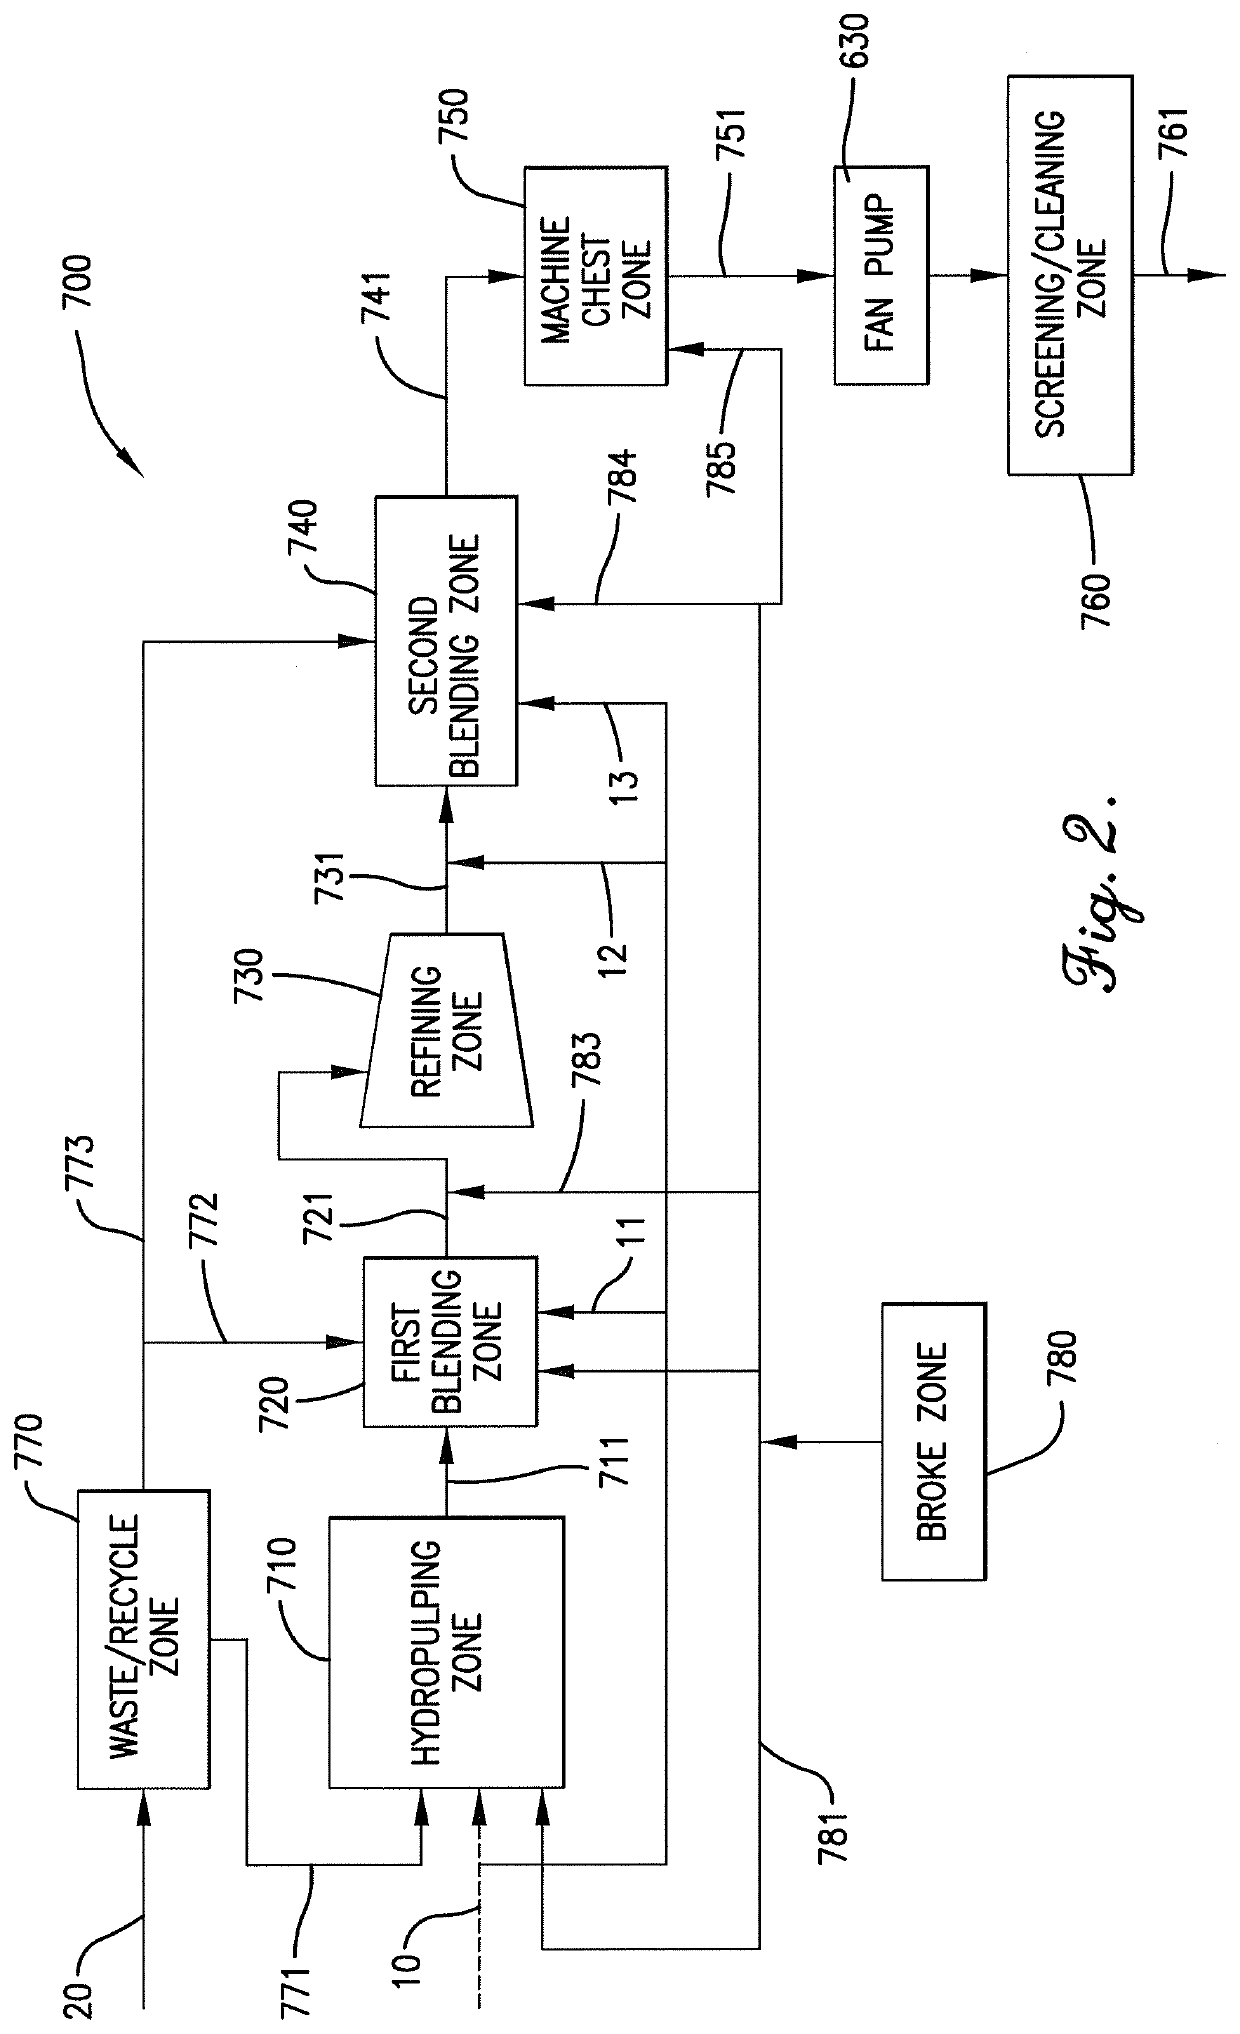 Process to produce a paper article comprising cellulose fibers and a staple fiber